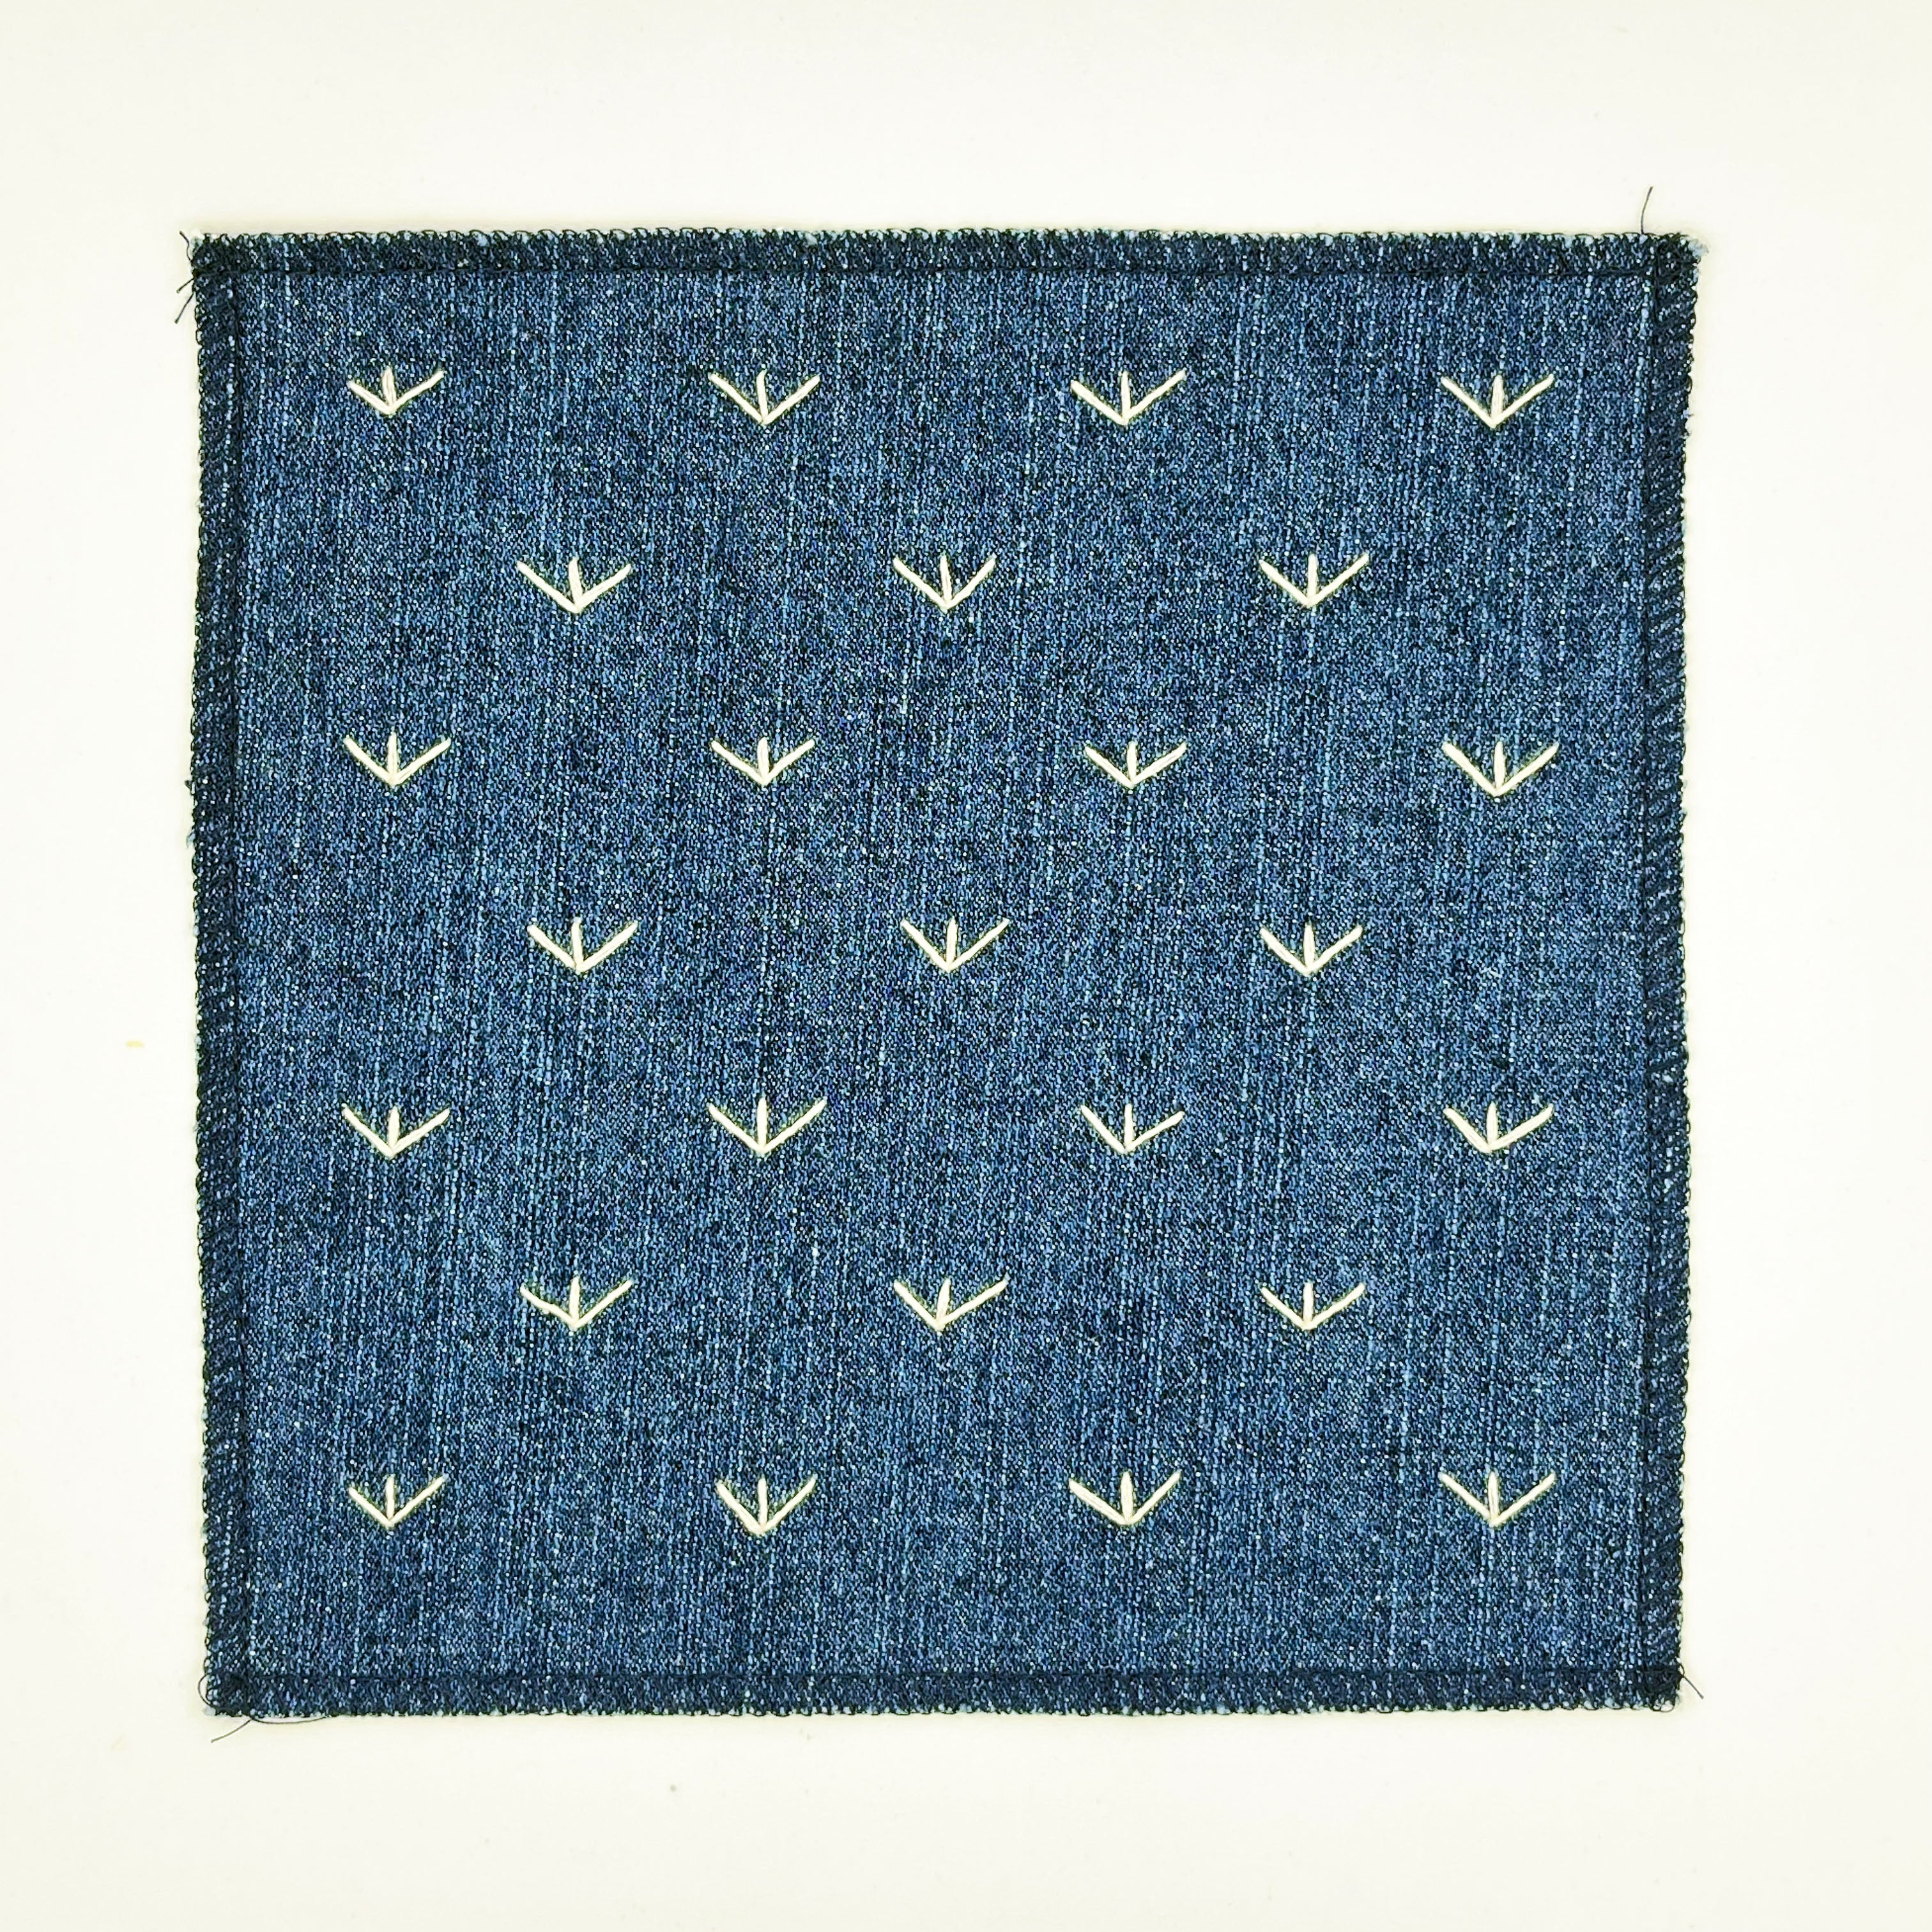 Square Patch with Embroidered Sprouts